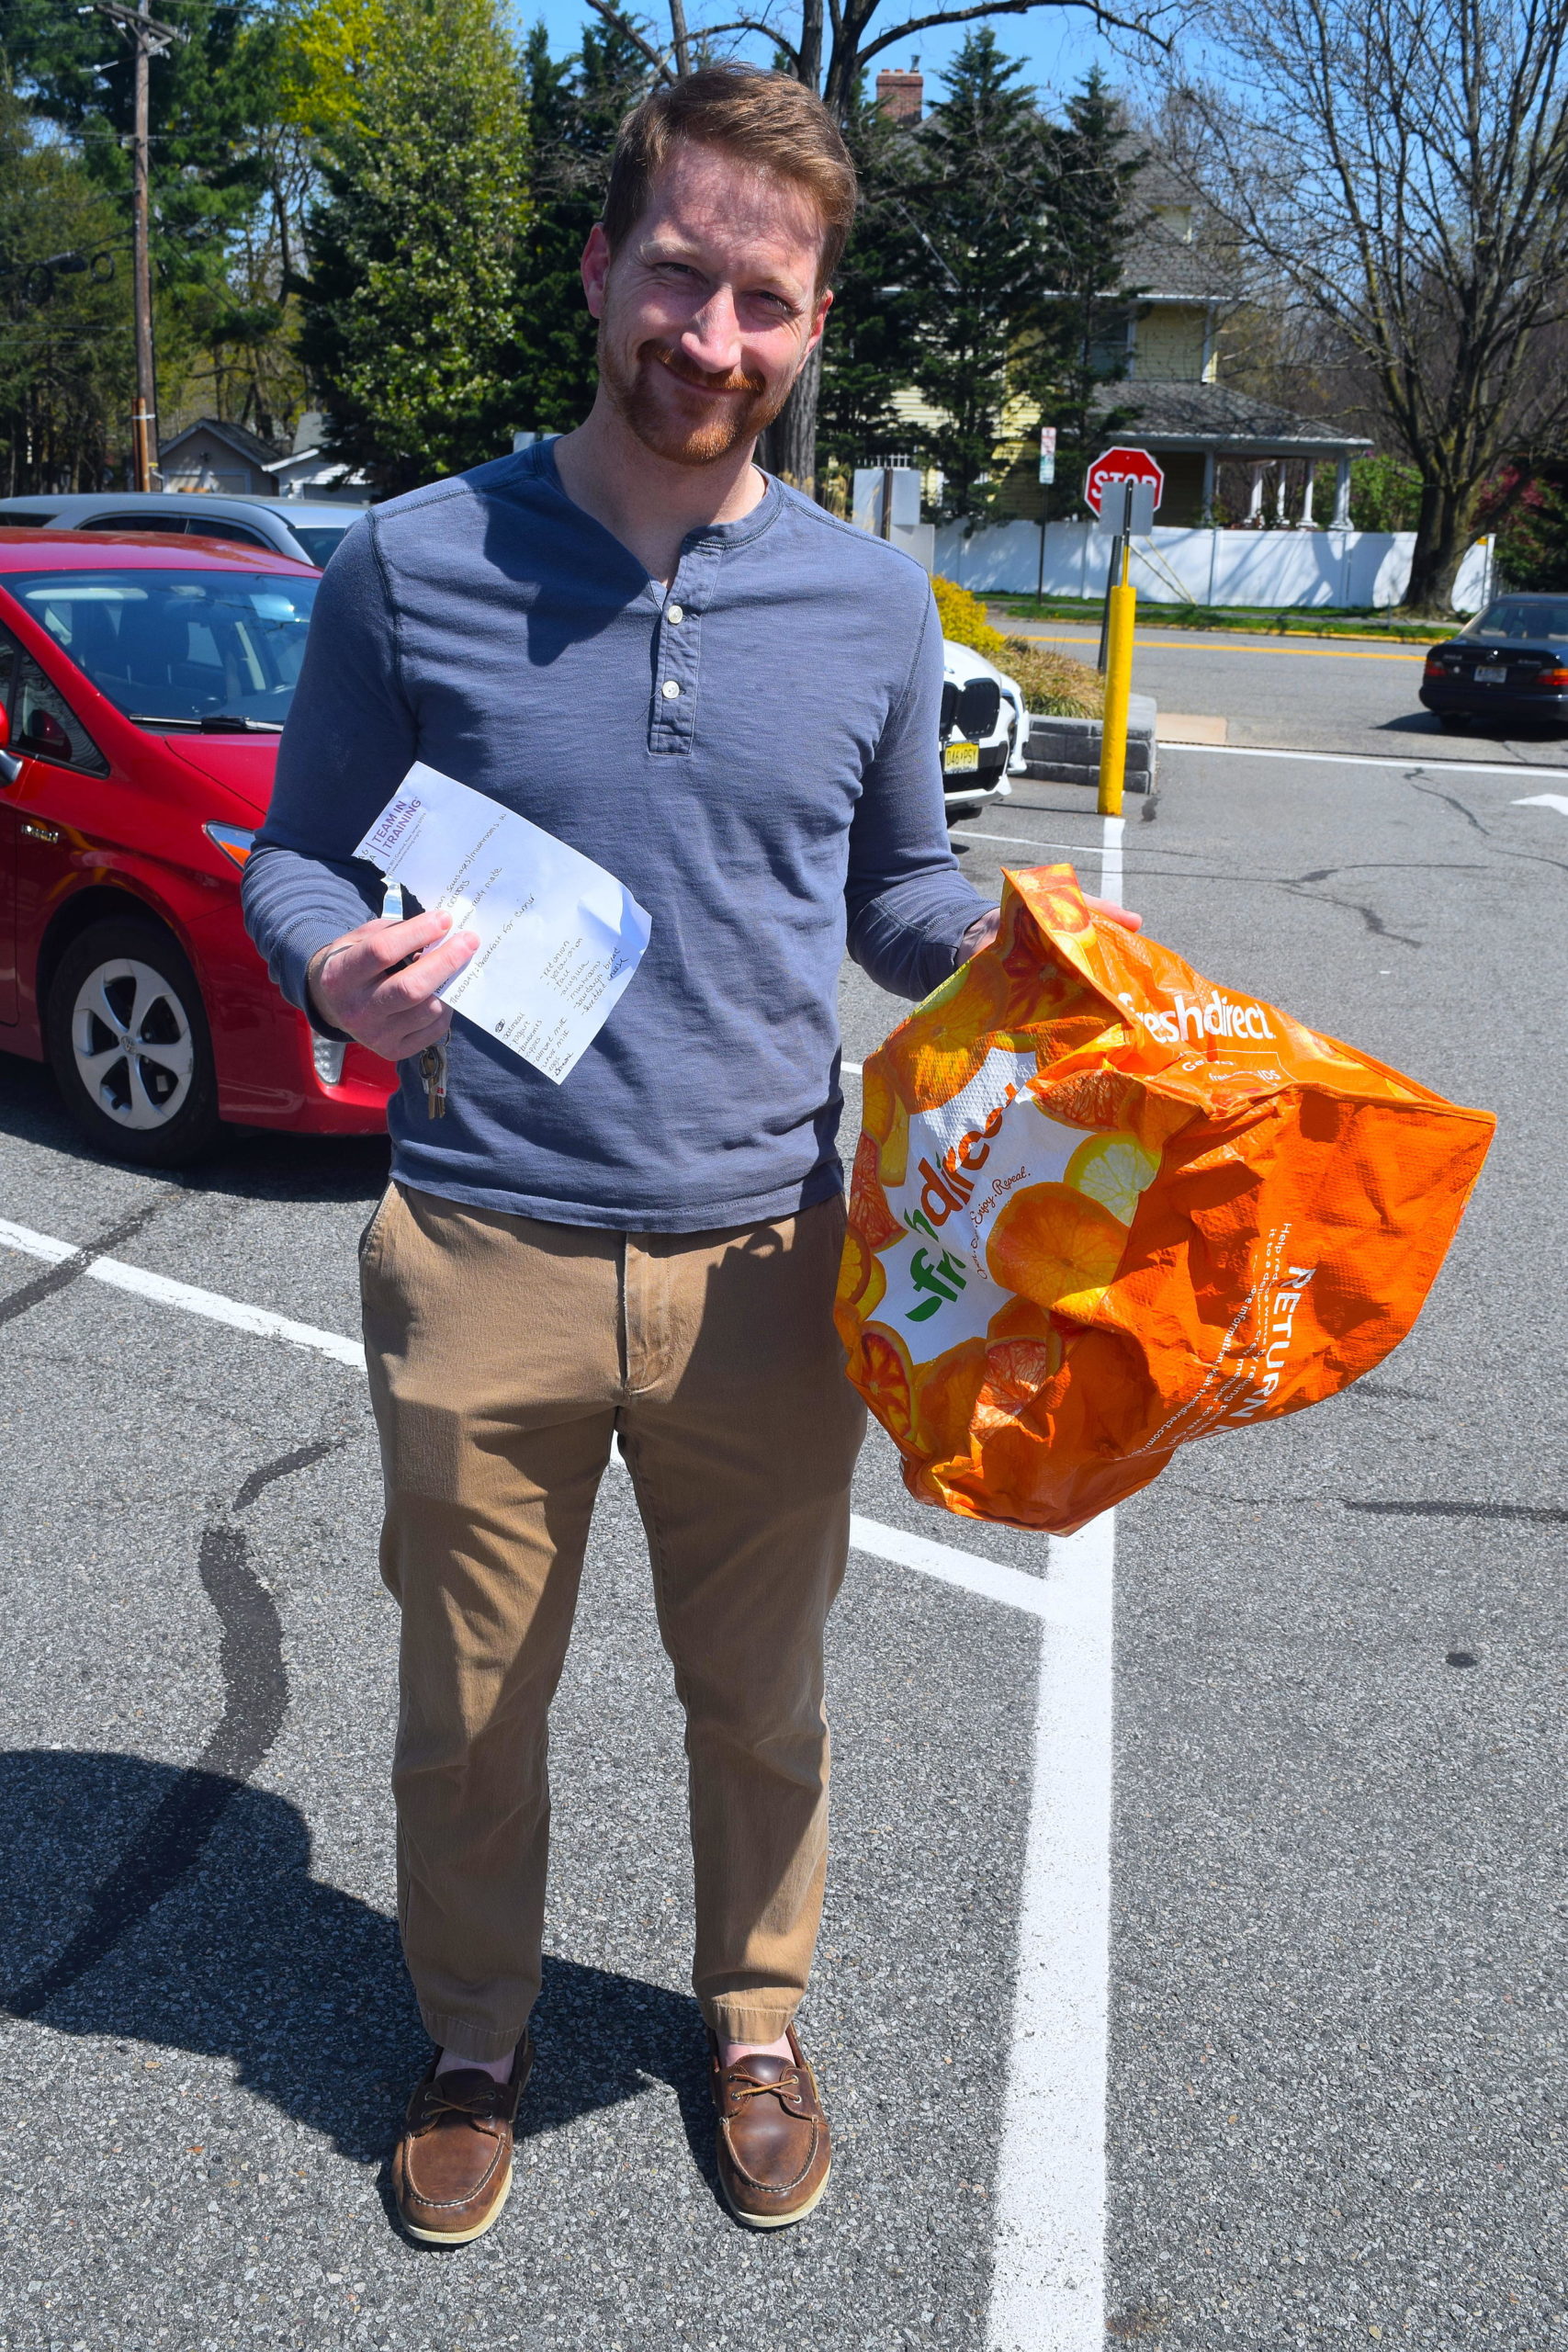 A man holds a reusable shopping bag in a parking lot